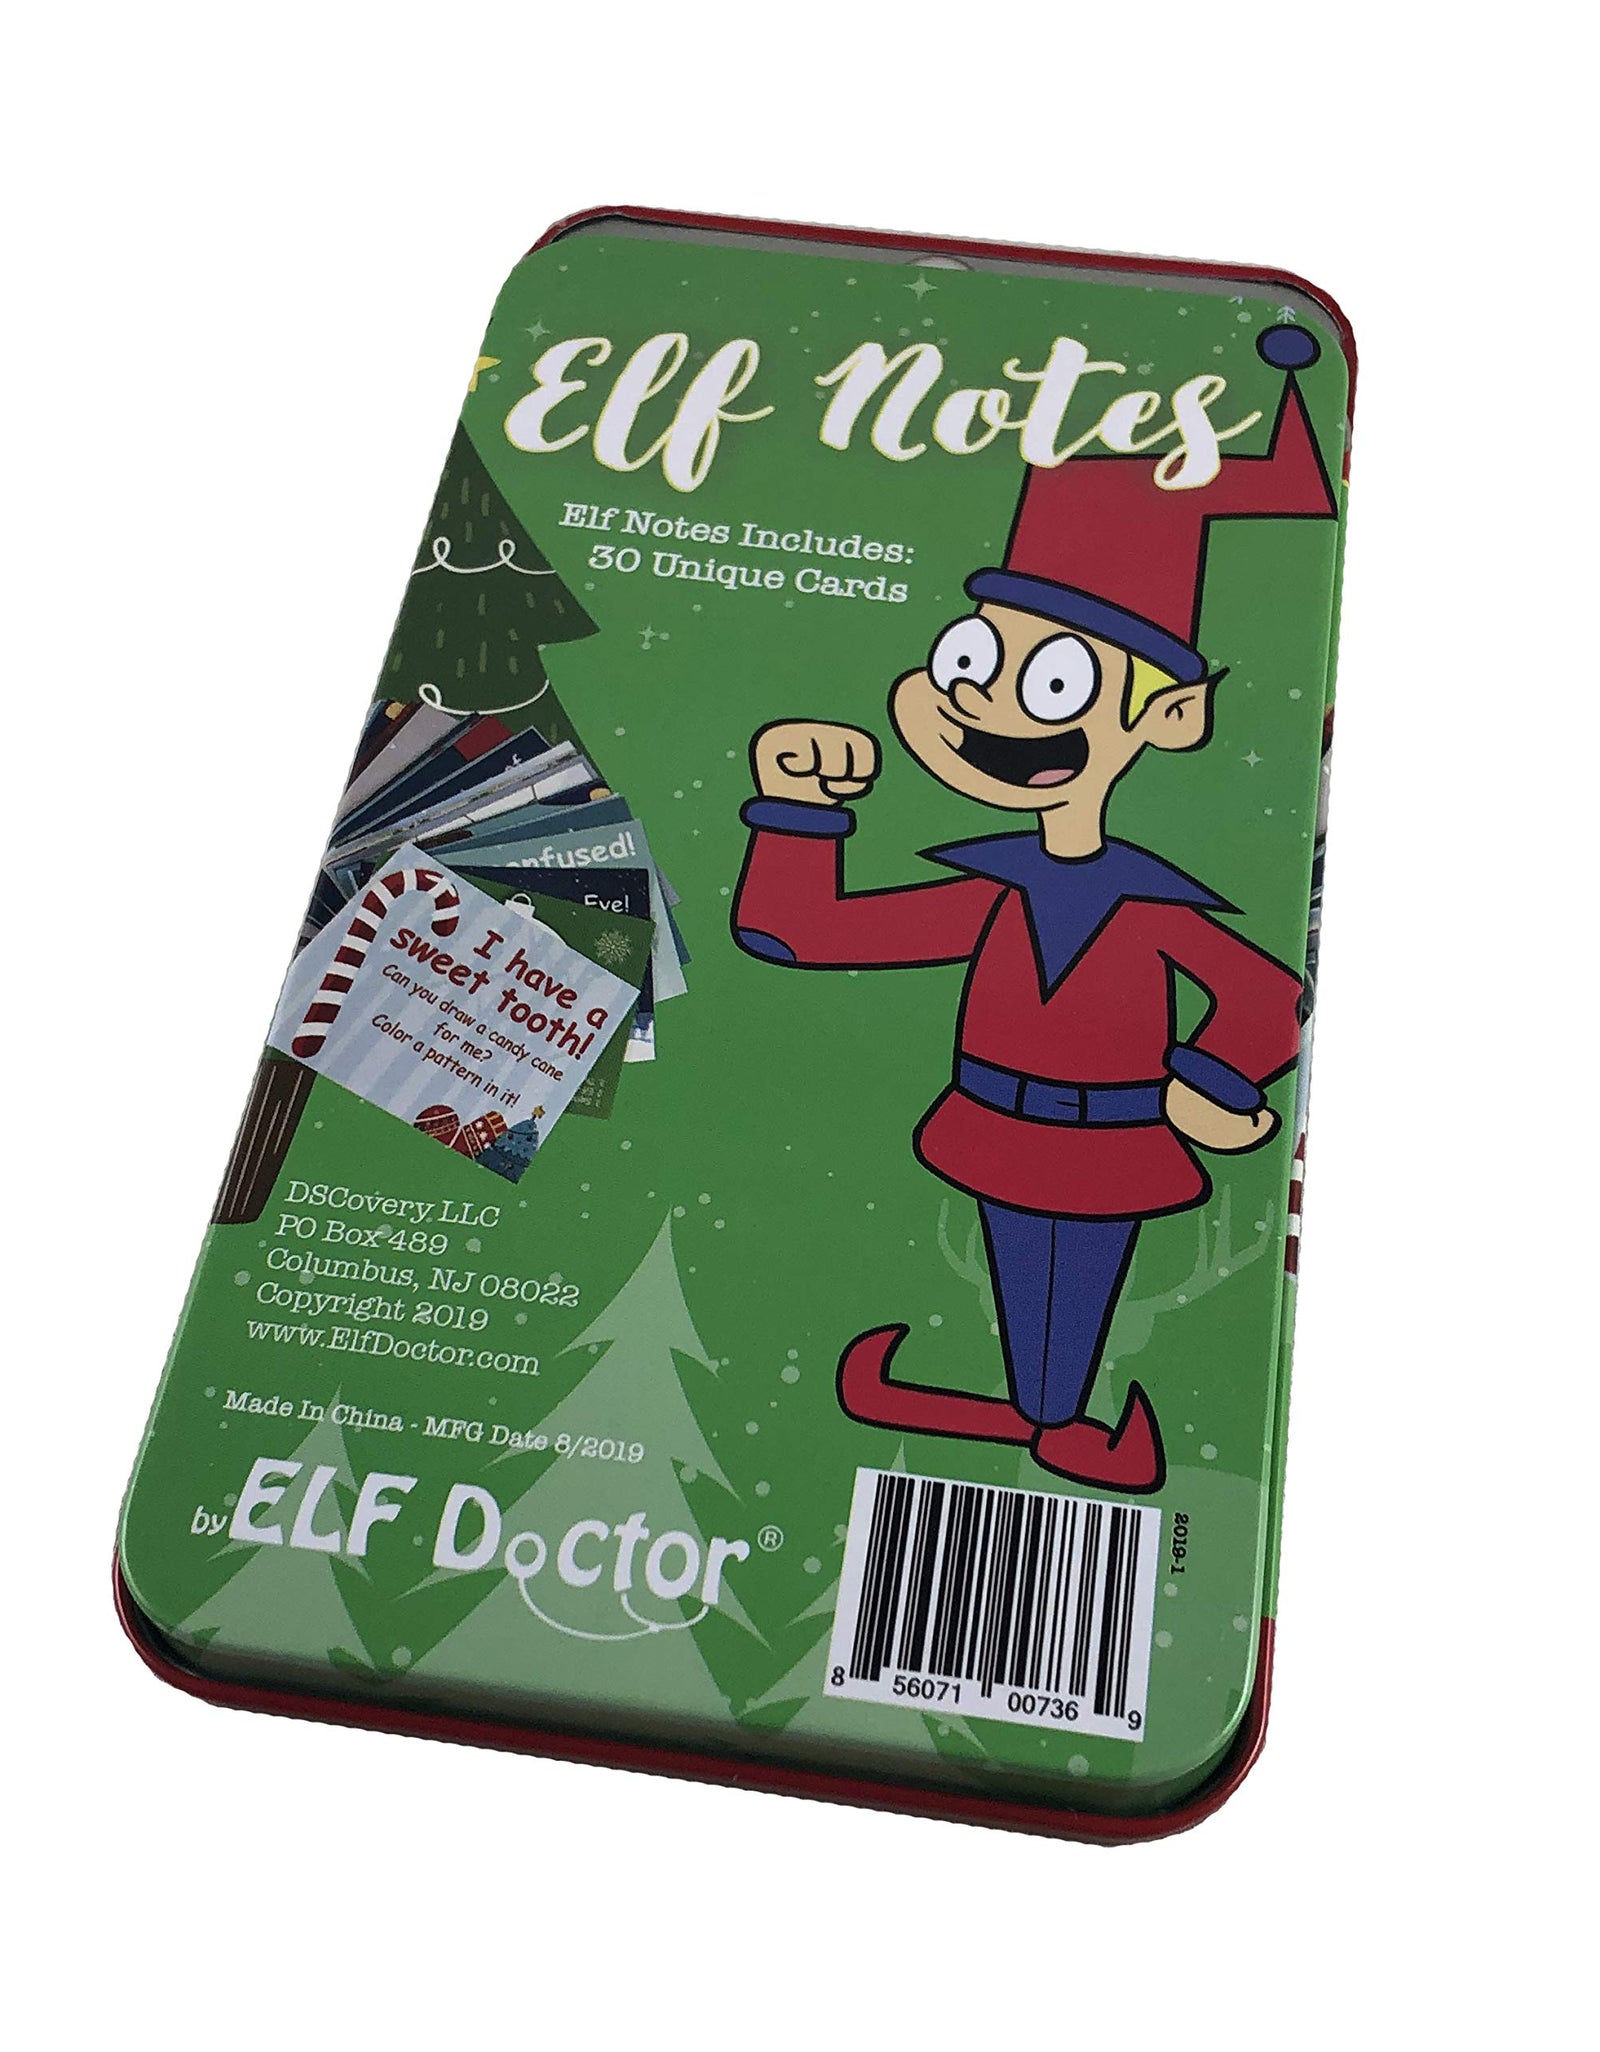 Elf Doctor ELF Notes: Elf Accessories - Educational Activity Notes for Your Favorite Christmas Elf - Pack of 30